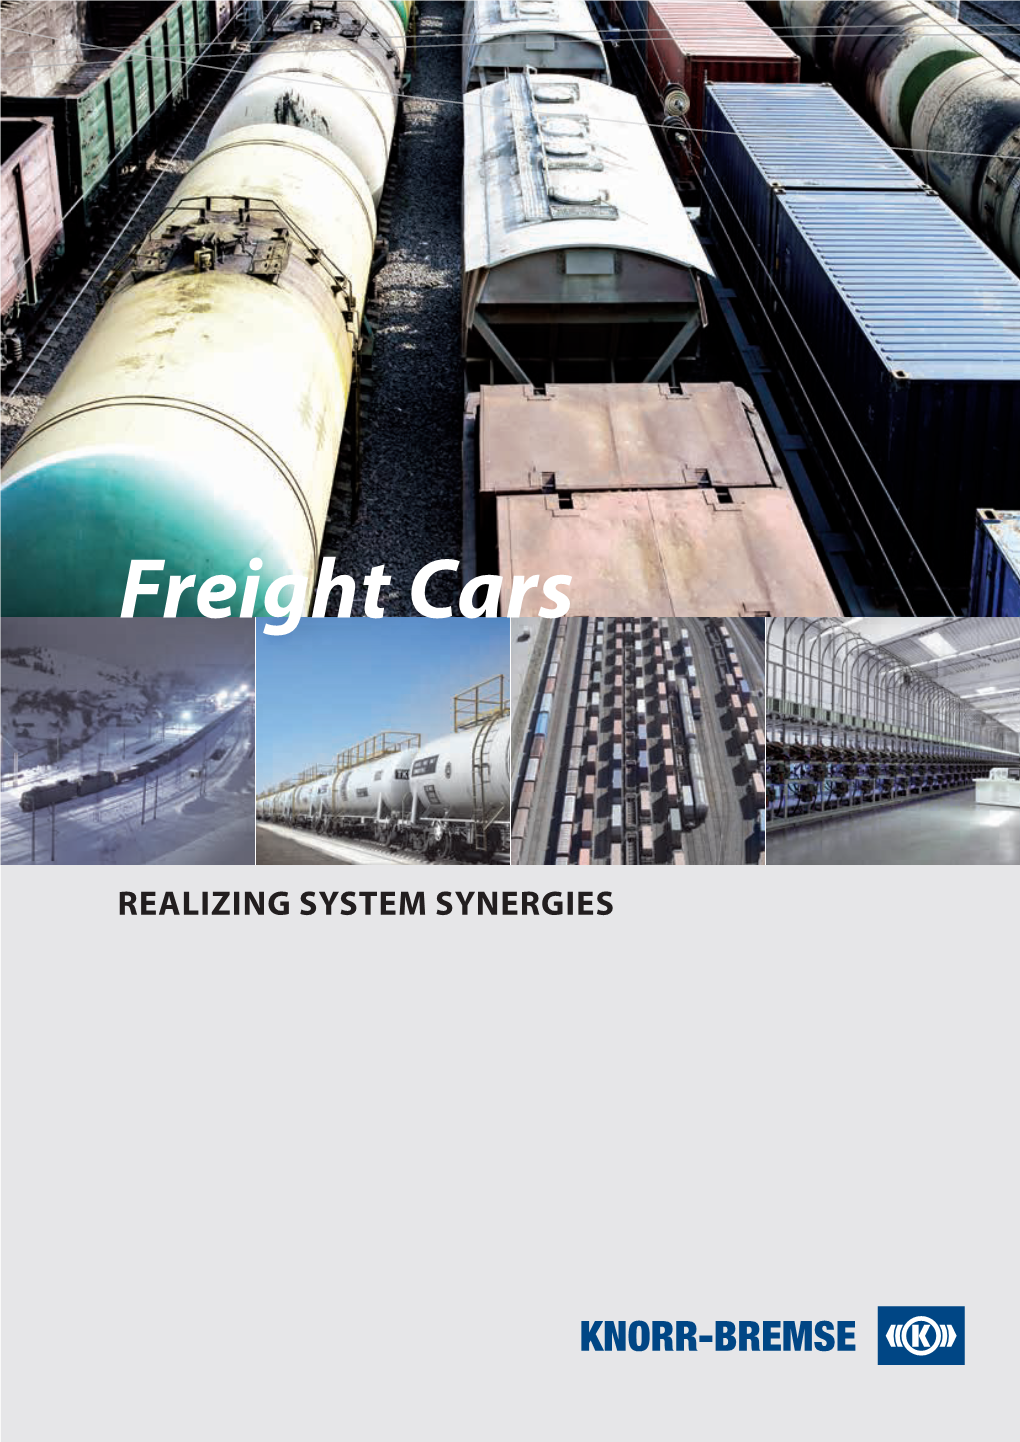 Freight Carssystems